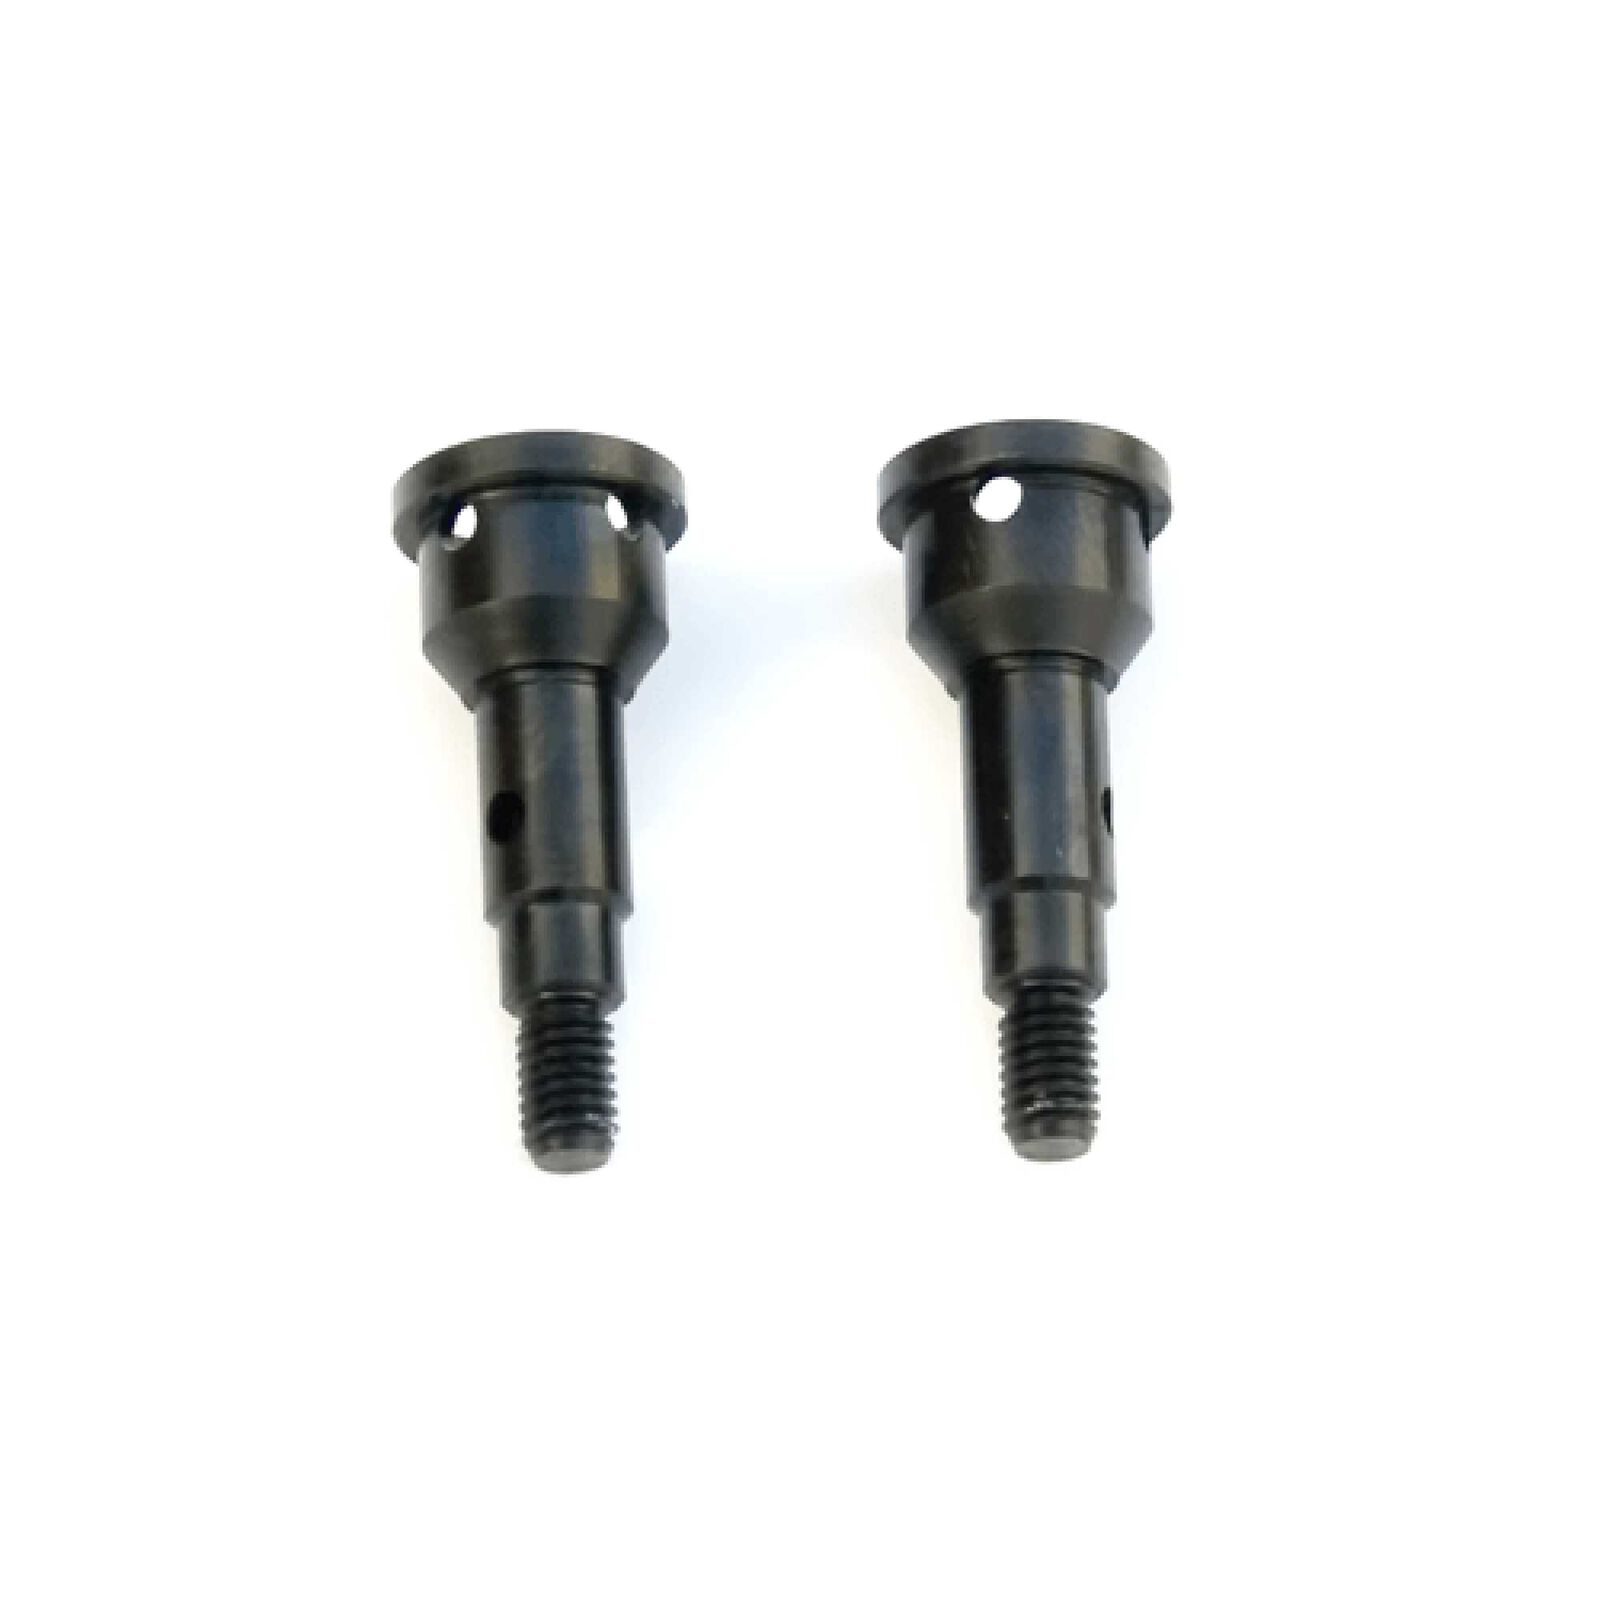 Front/Rear Stub Axles for M6 Driveshafts, 6mm